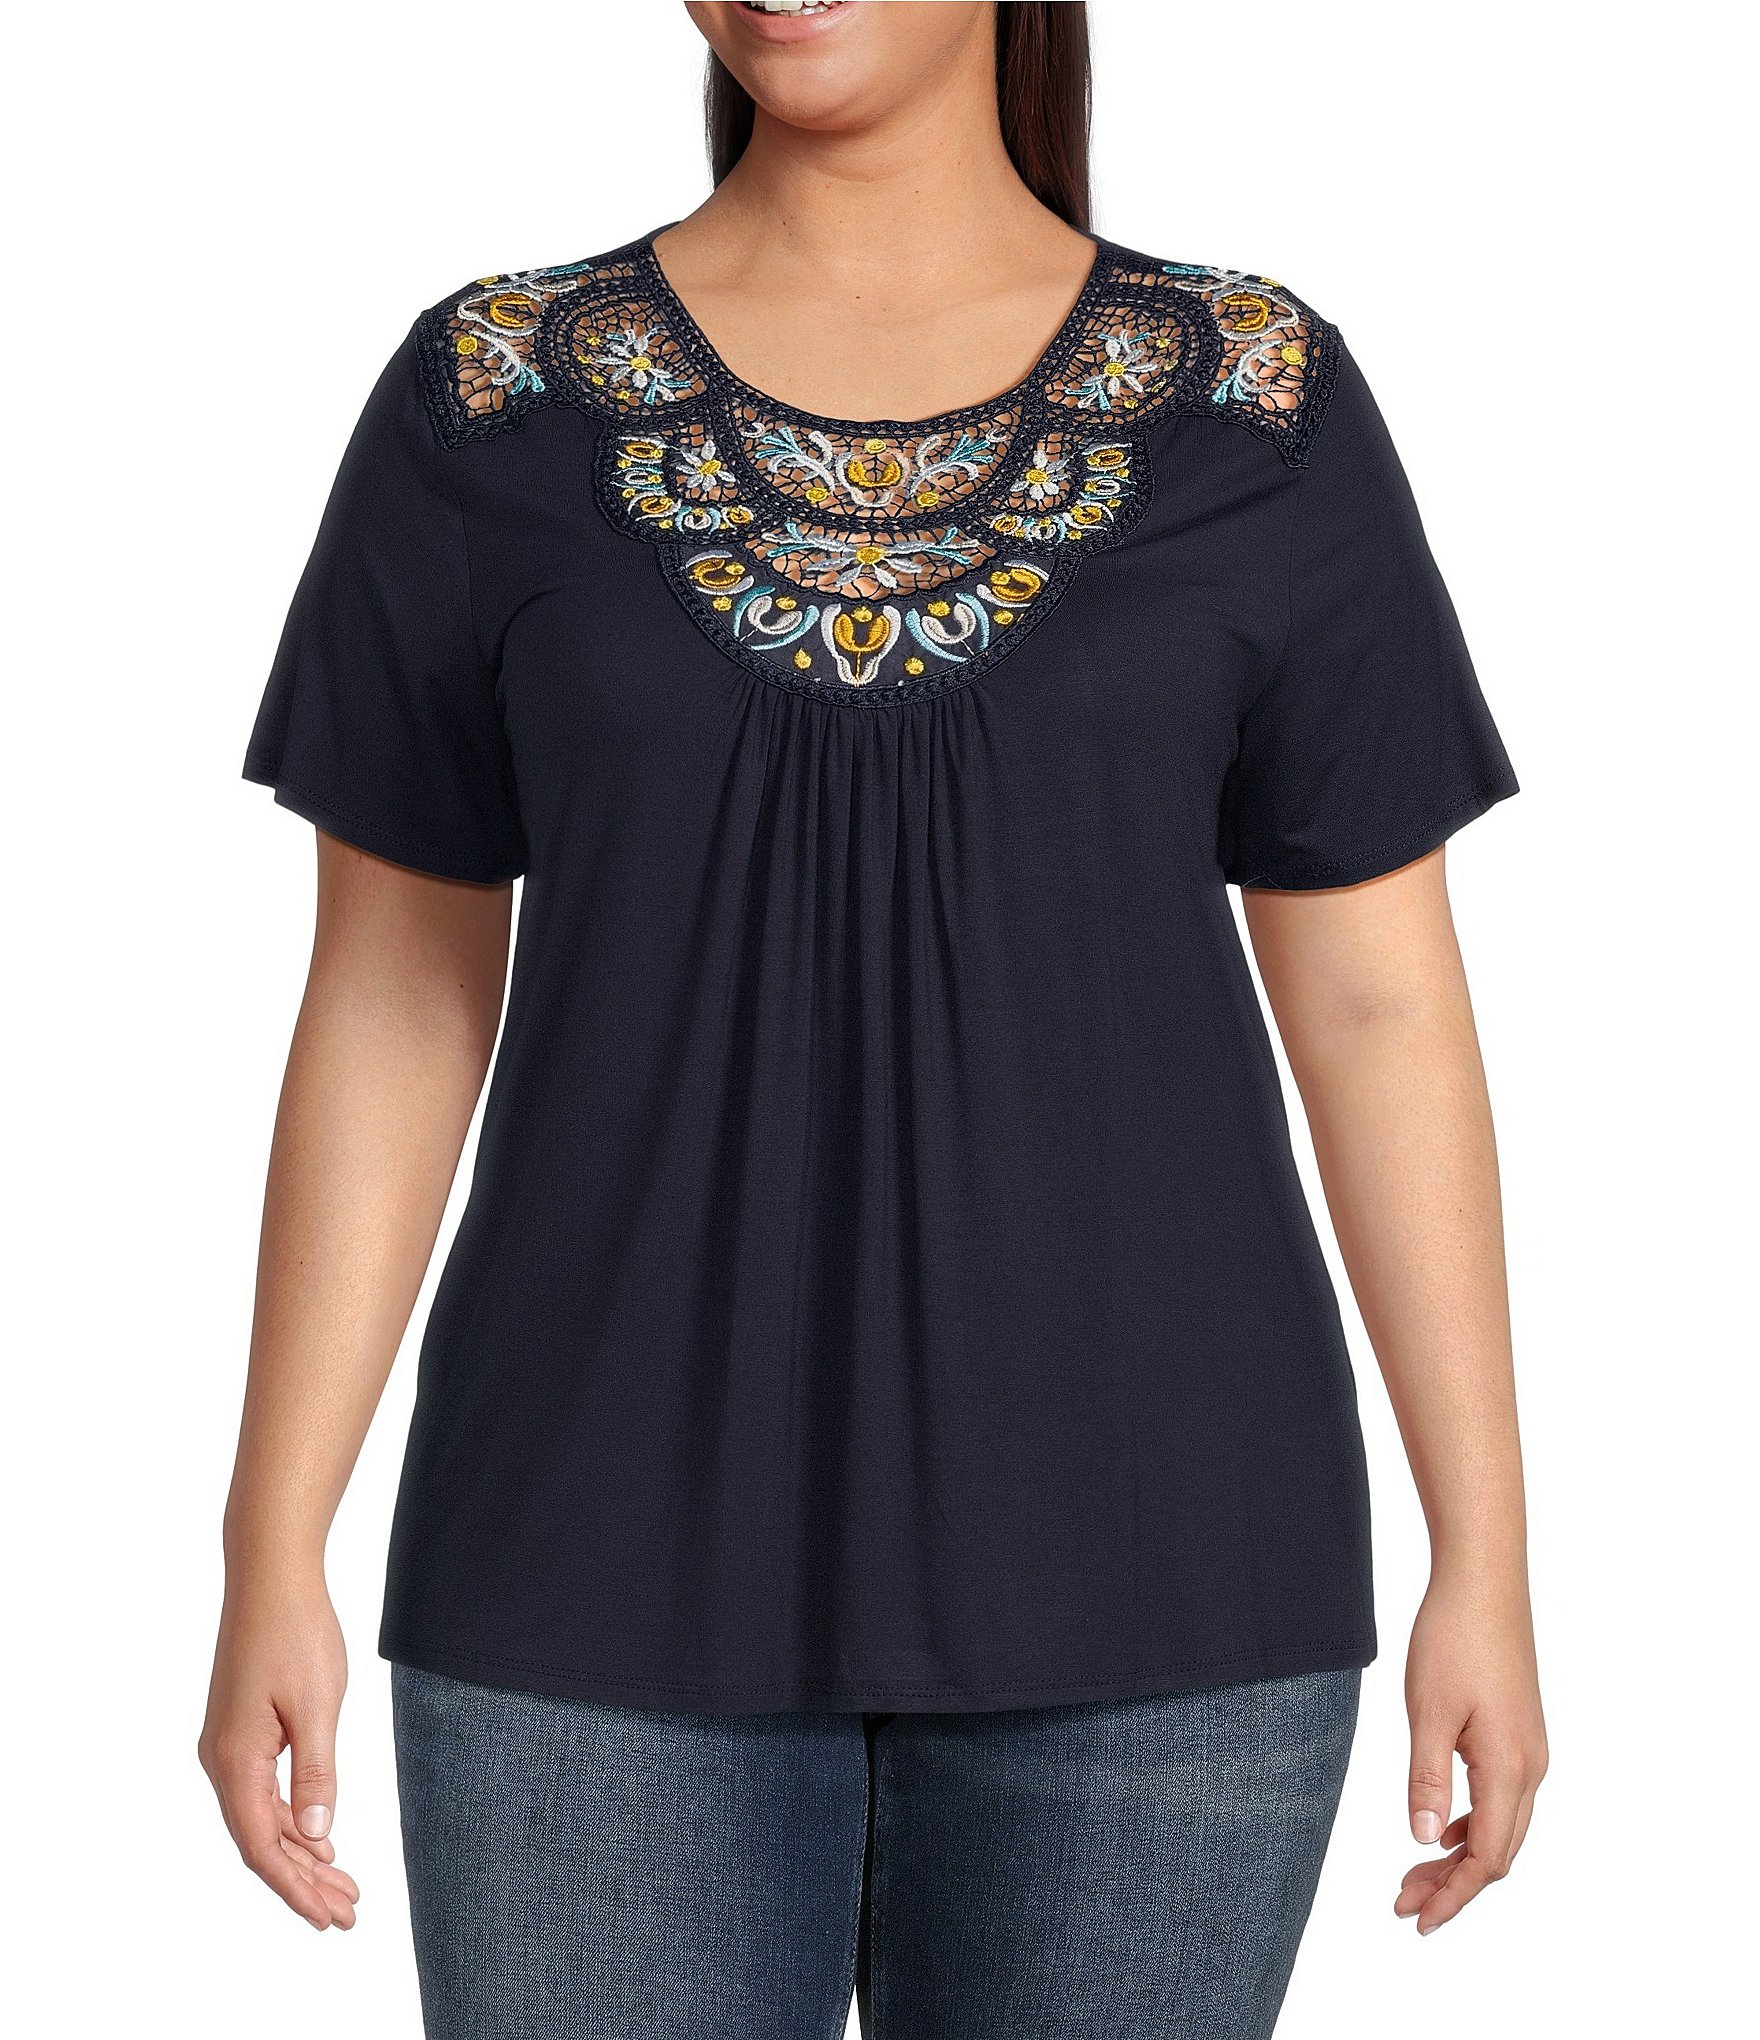 Moa Moa Plus Size Embroidered Applique Scoop Neck Short Sleeve Shirt ...